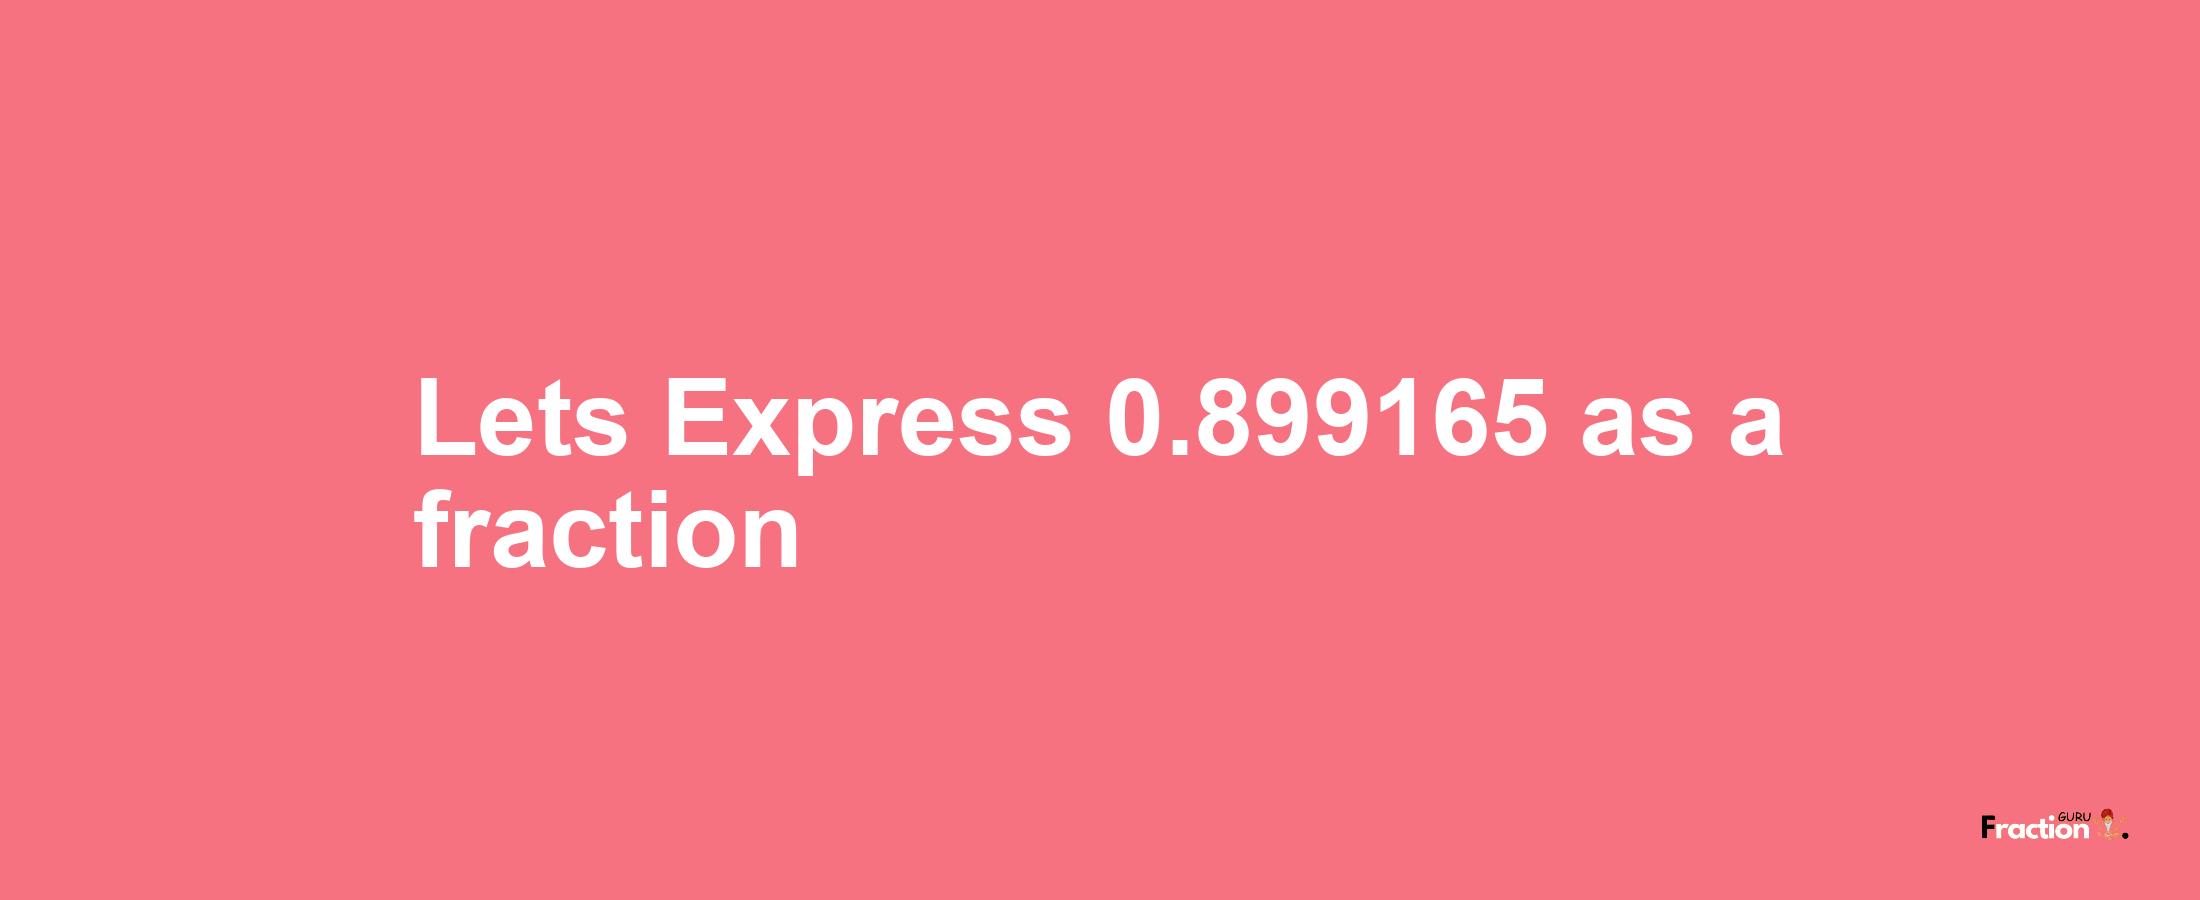 Lets Express 0.899165 as afraction